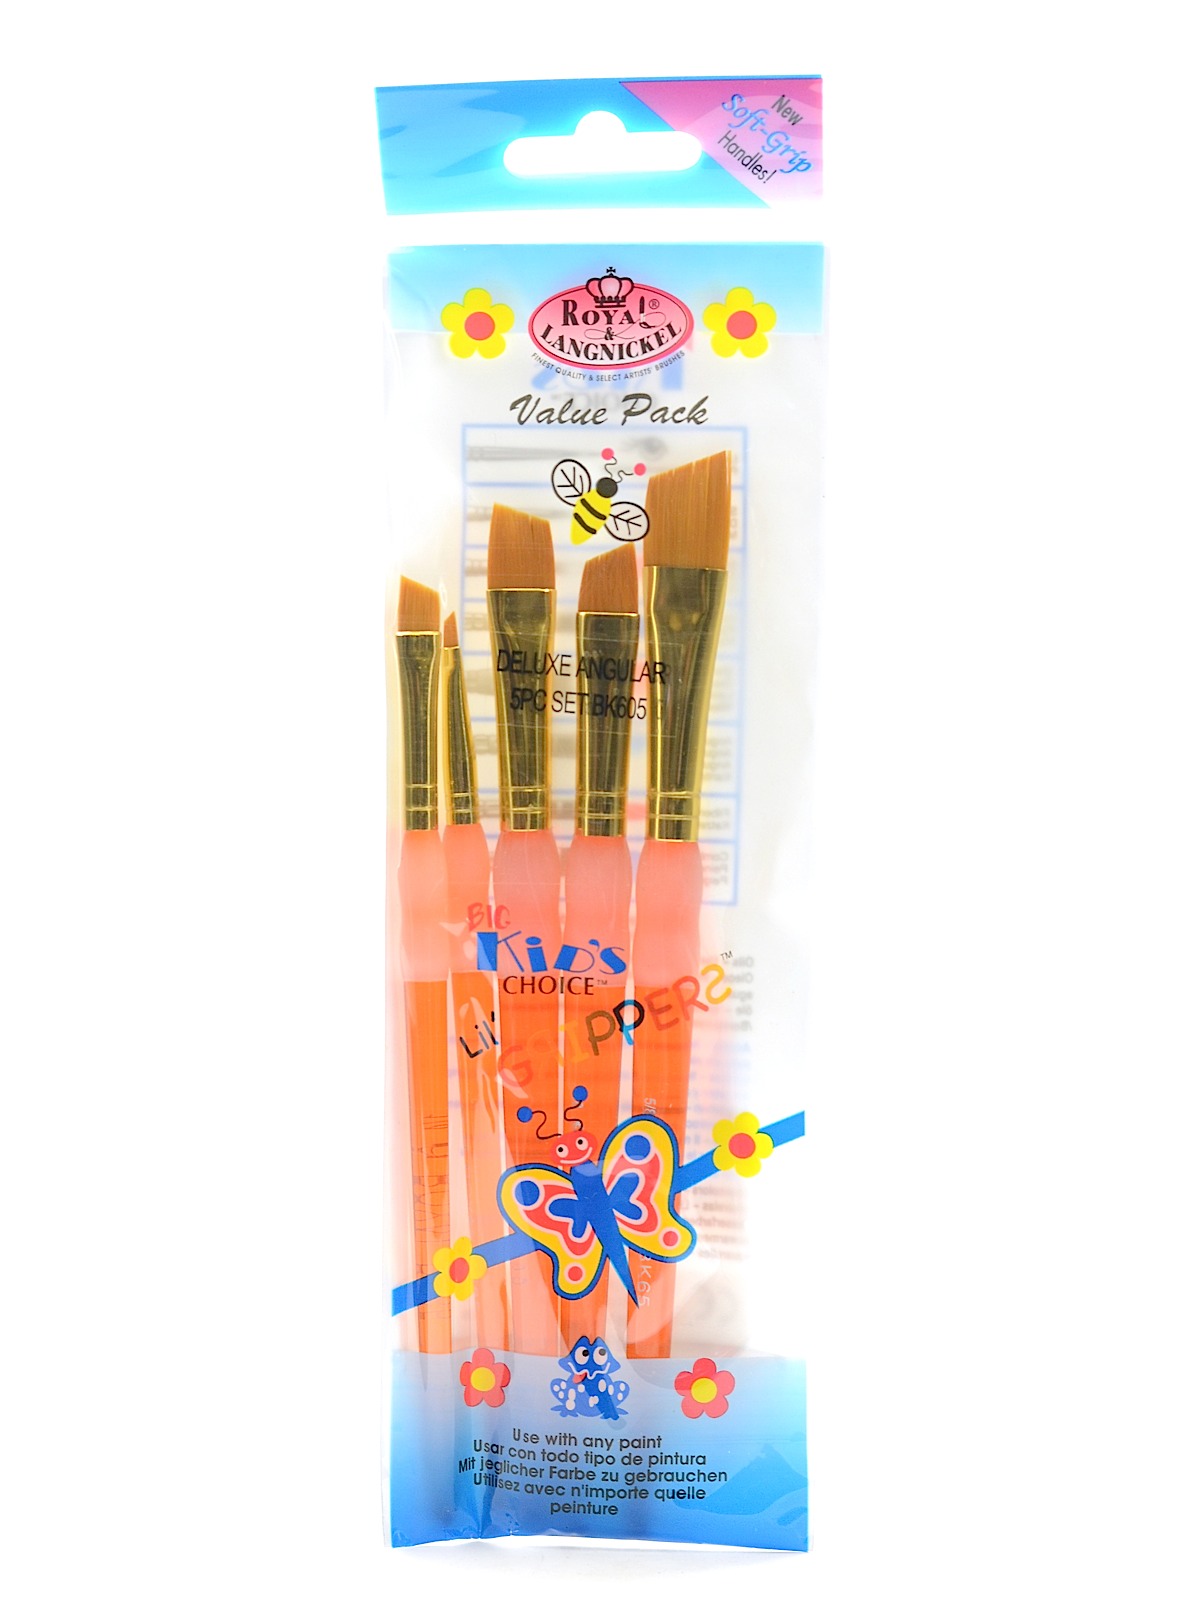 Big Kid's Choice Angular Brush 1 8 In., 1 4 In., 3 8 In.,1 2 In. And 5 8 In. Set Of 5